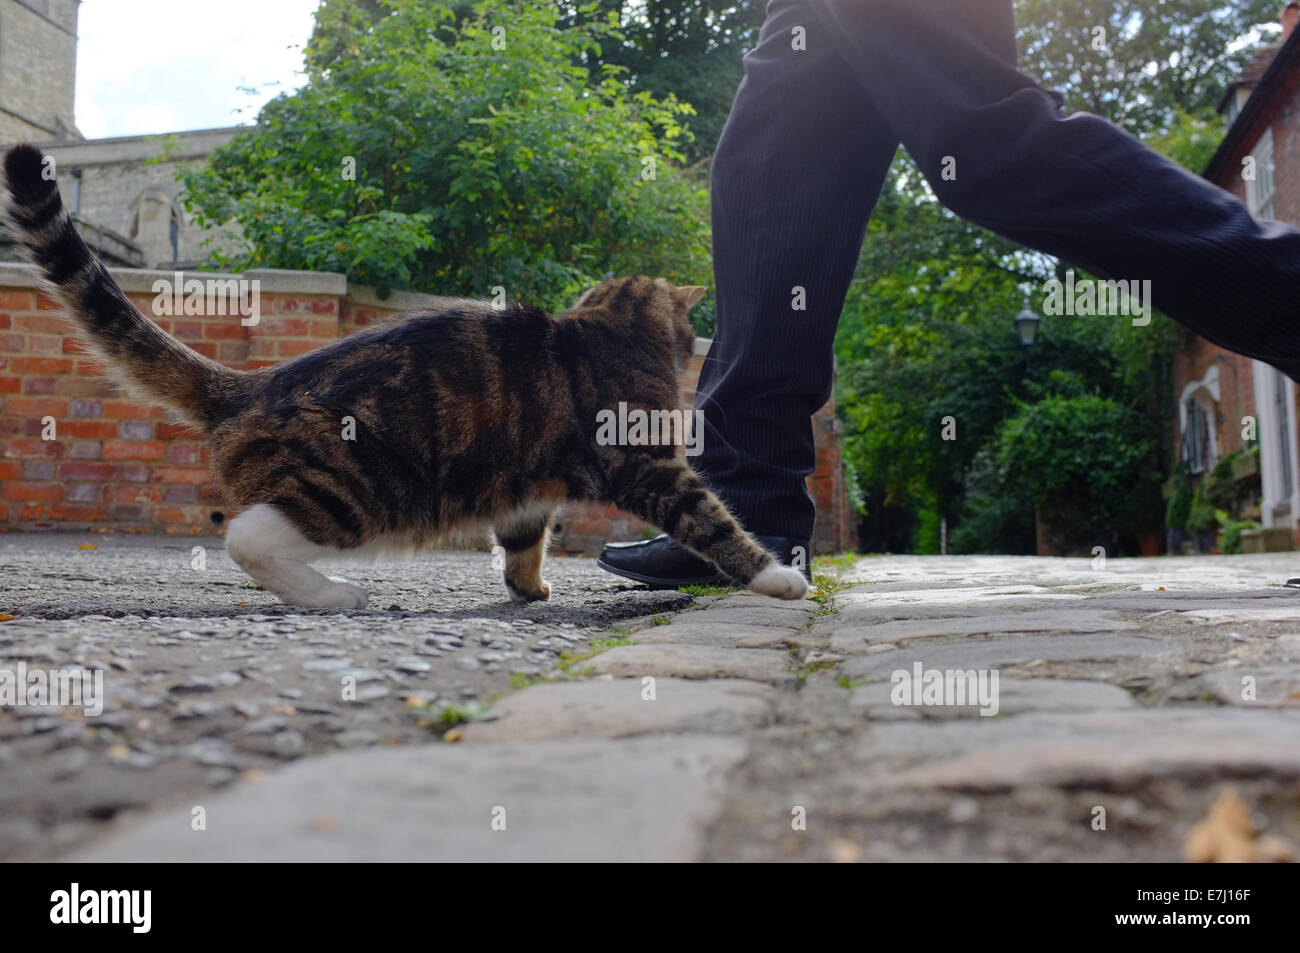 Man runs past a startled cat in the street Stock Photo